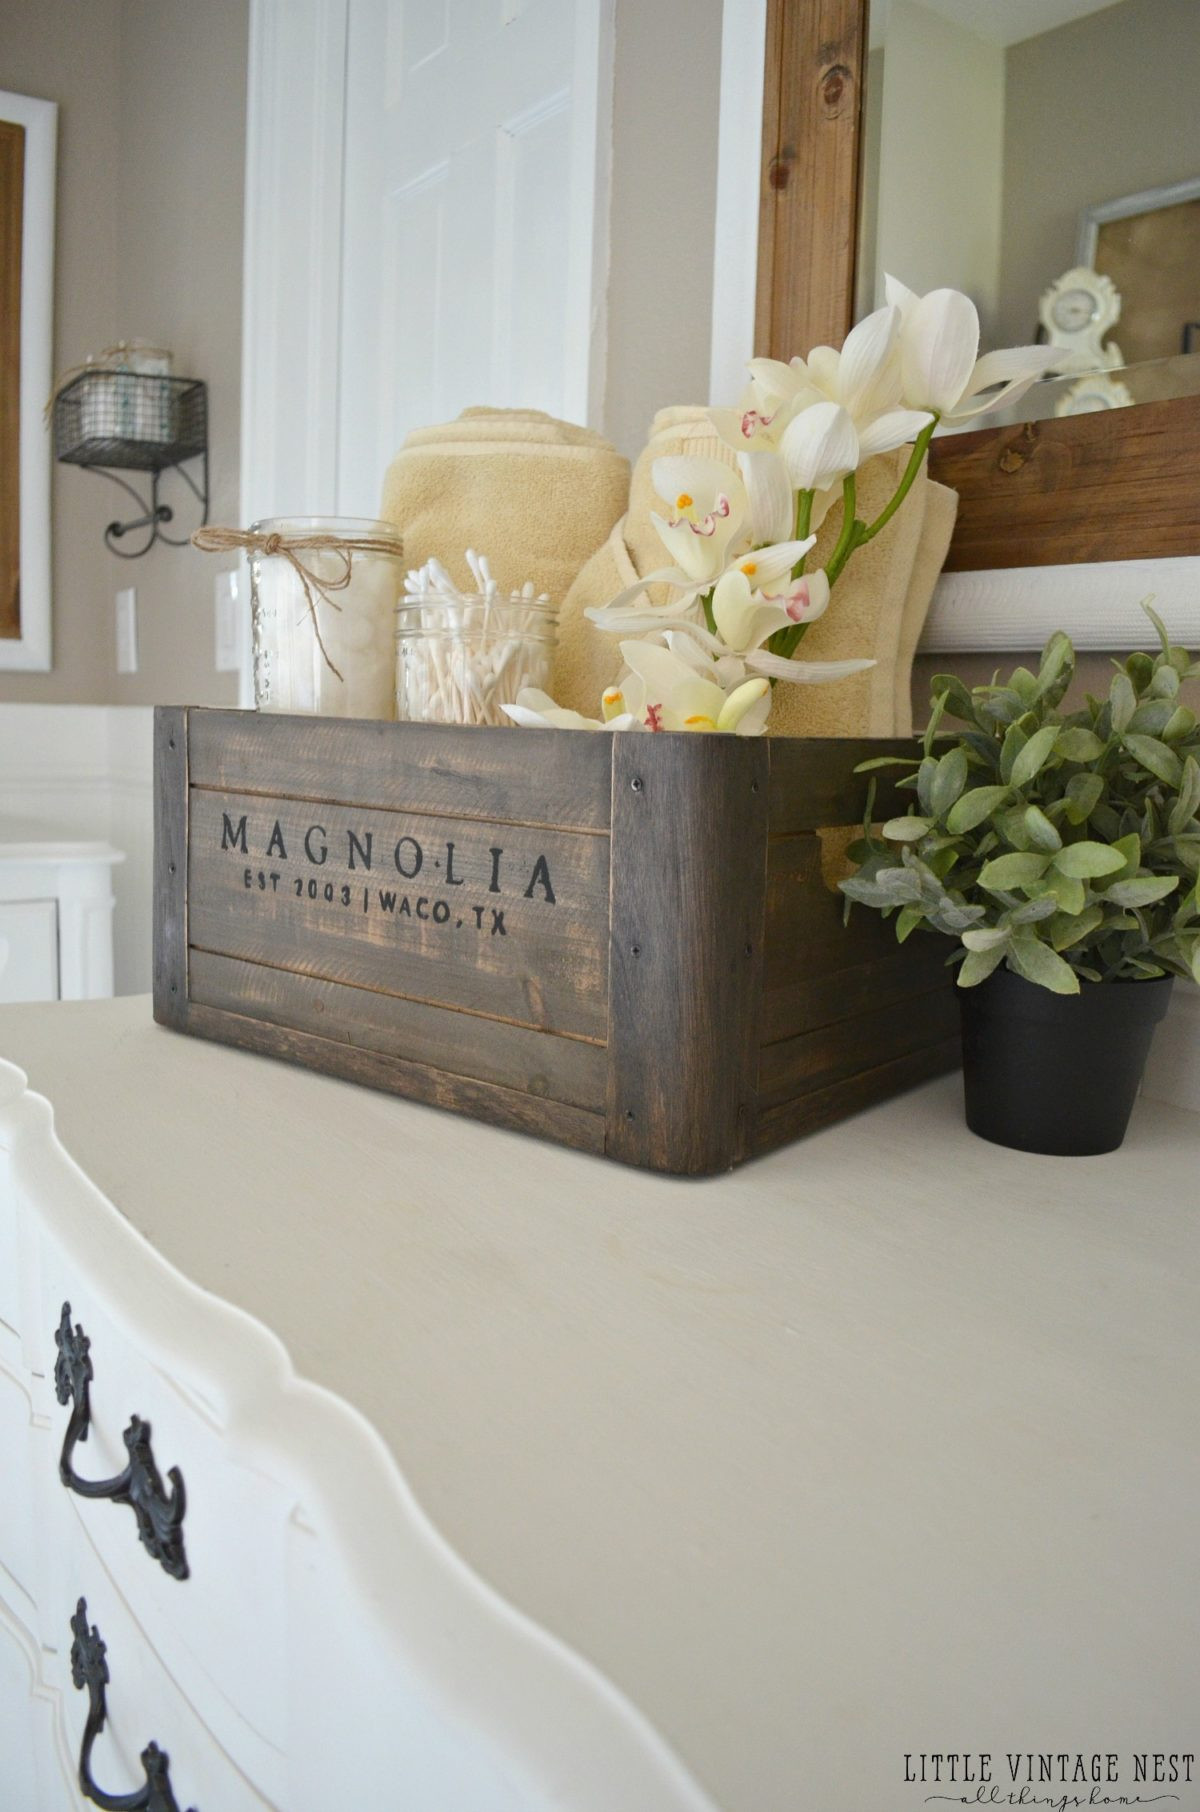 Bathroom Counter Decorating Ideas
 5 Ways to Style a Wooden Crate Little Vintage Nest